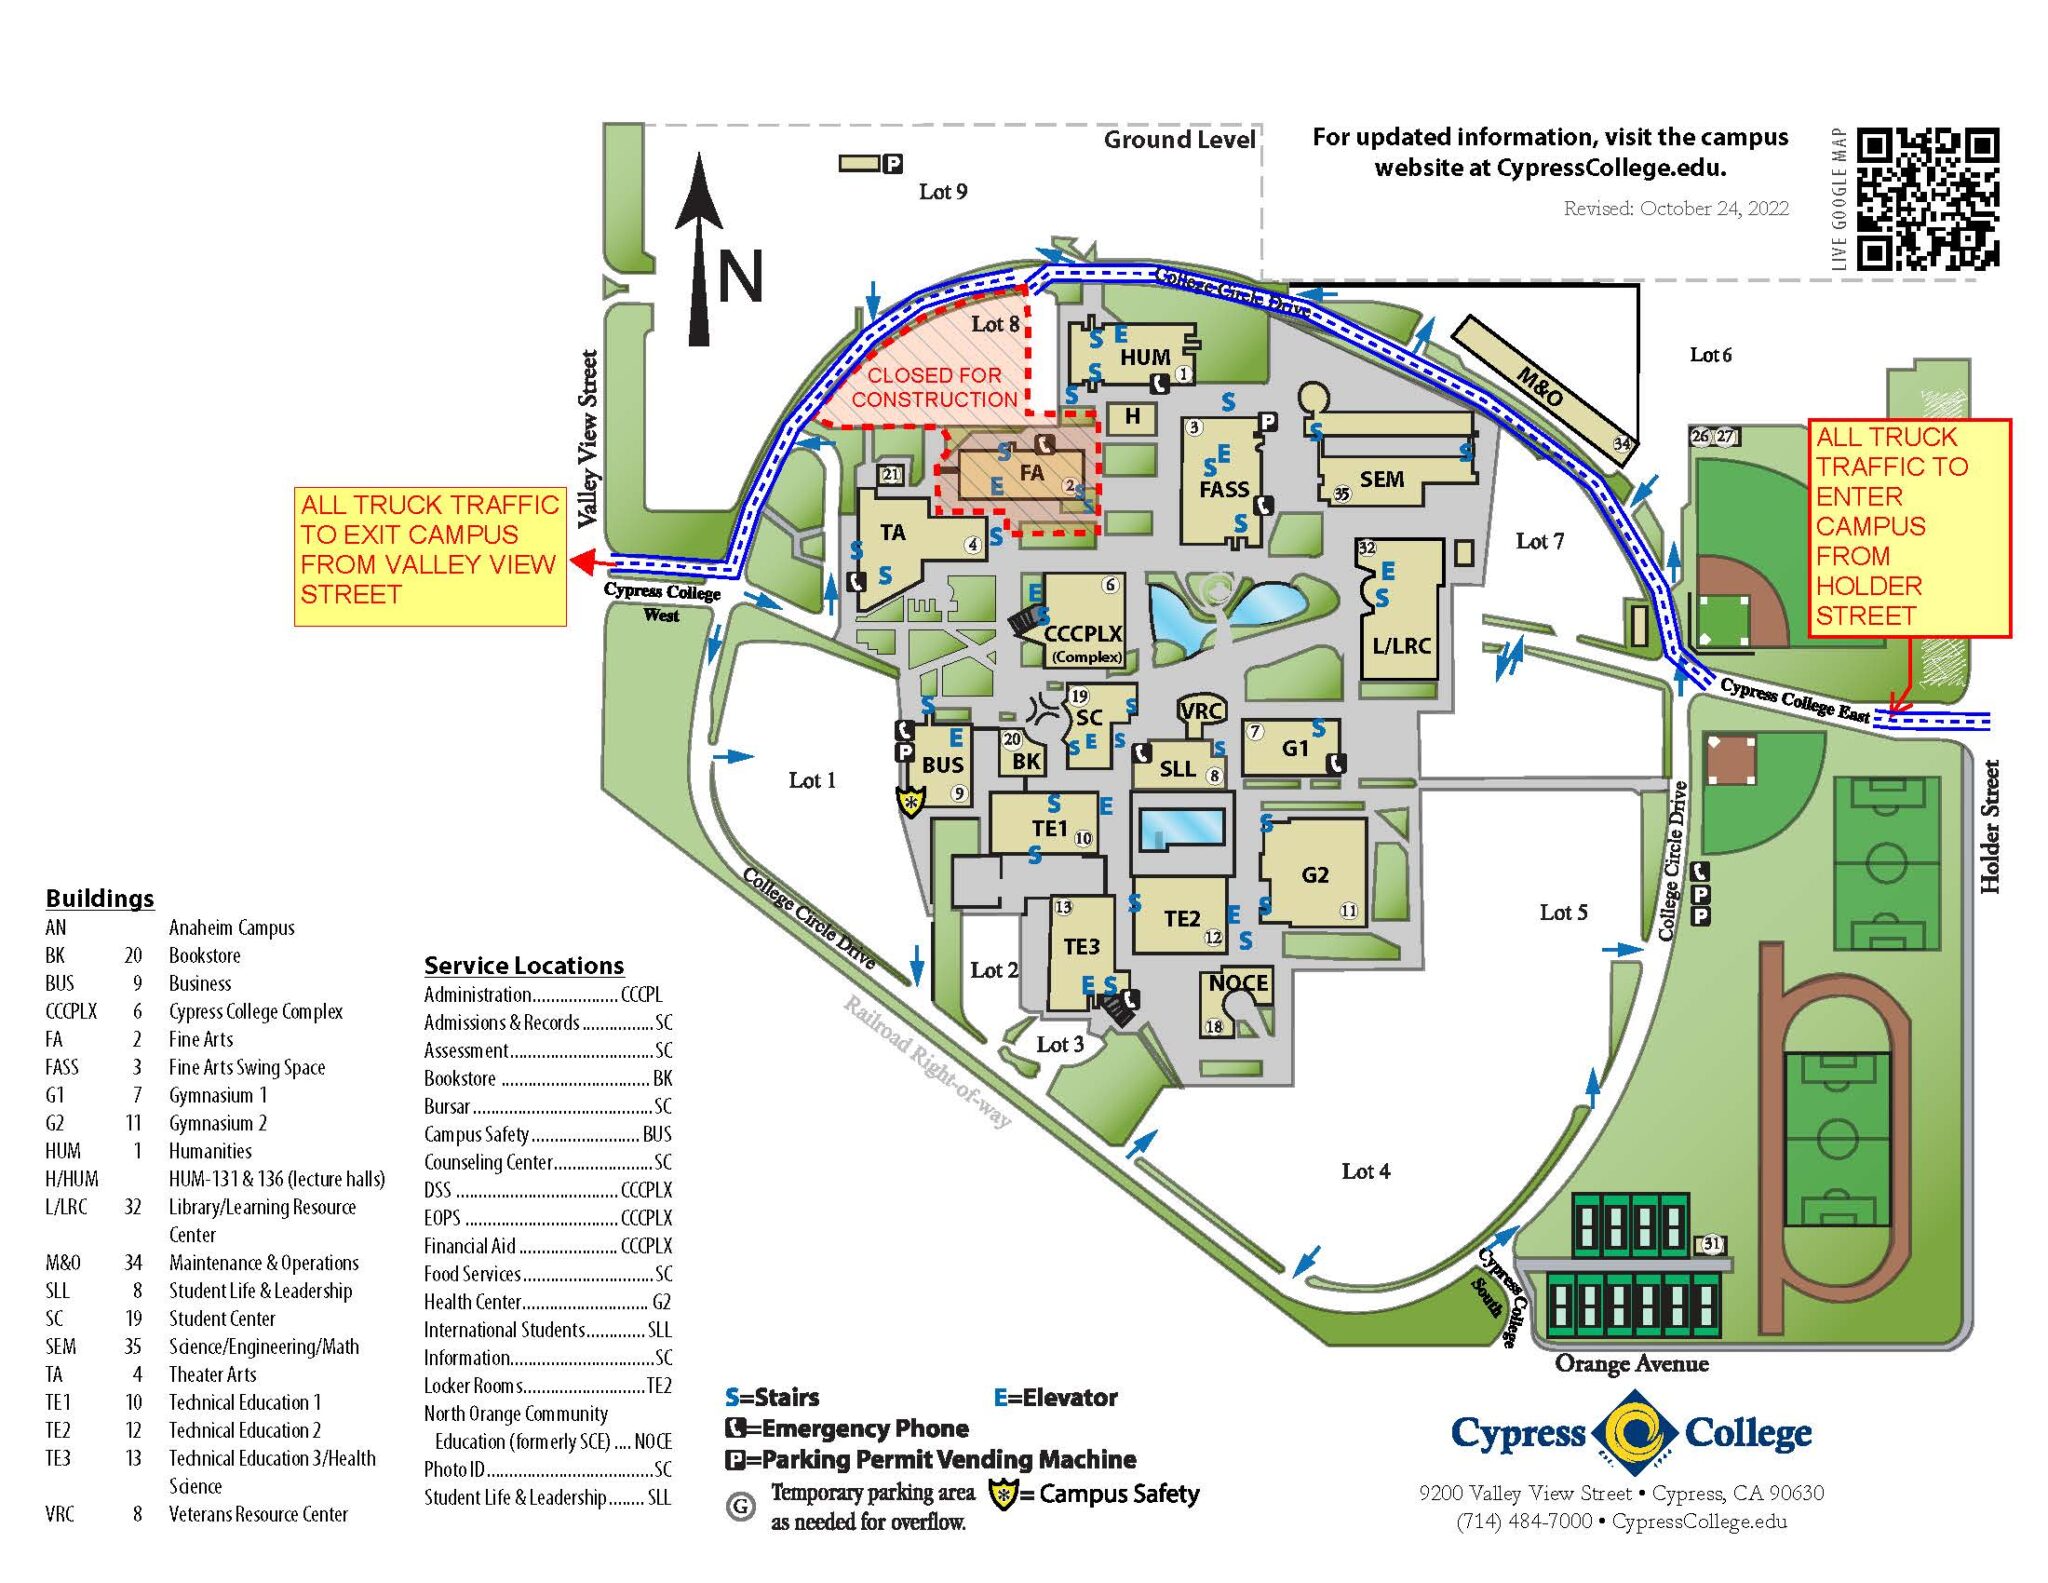 Map of Campus showing construction of Fine Arts building